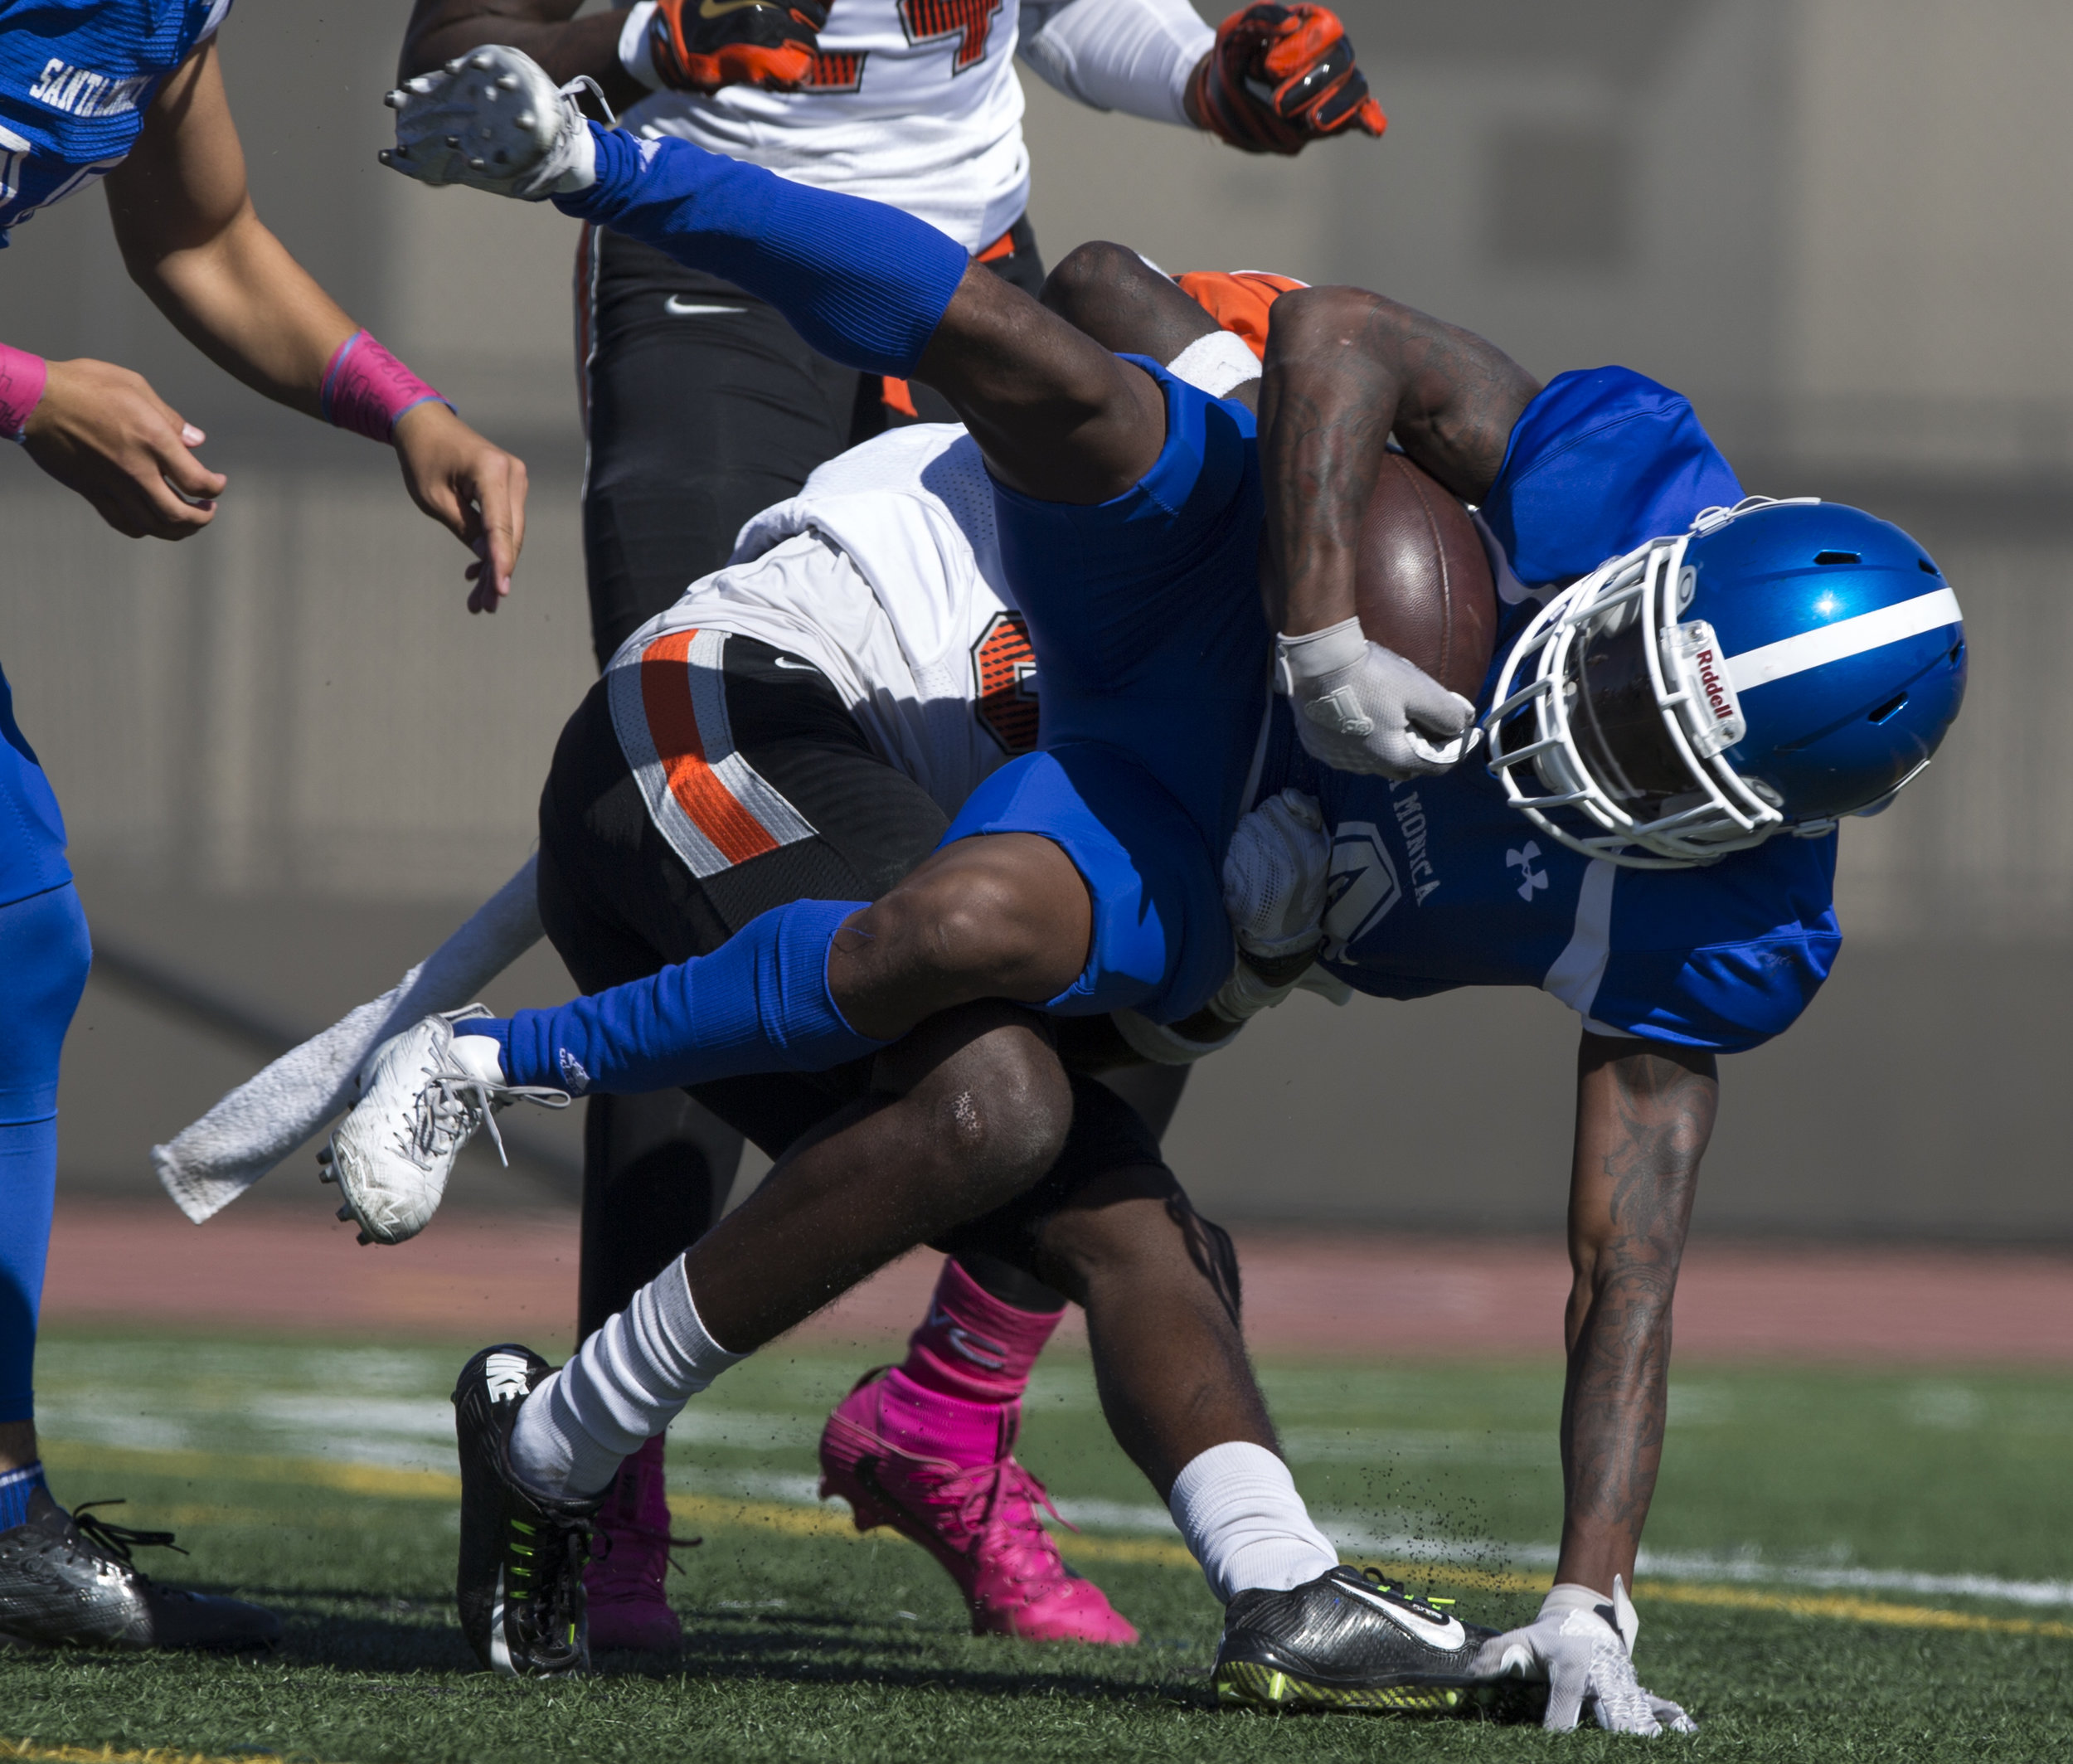  Santa Monica College Corsair wide receiver Franklin Cristian (4) gets tackled by Ventura College Pirate defensive back Jon Hughes (33) on the Corsair Field at Santa Monica College on October 21, 2017 in Santa Monica, California. Corsairs lose to the